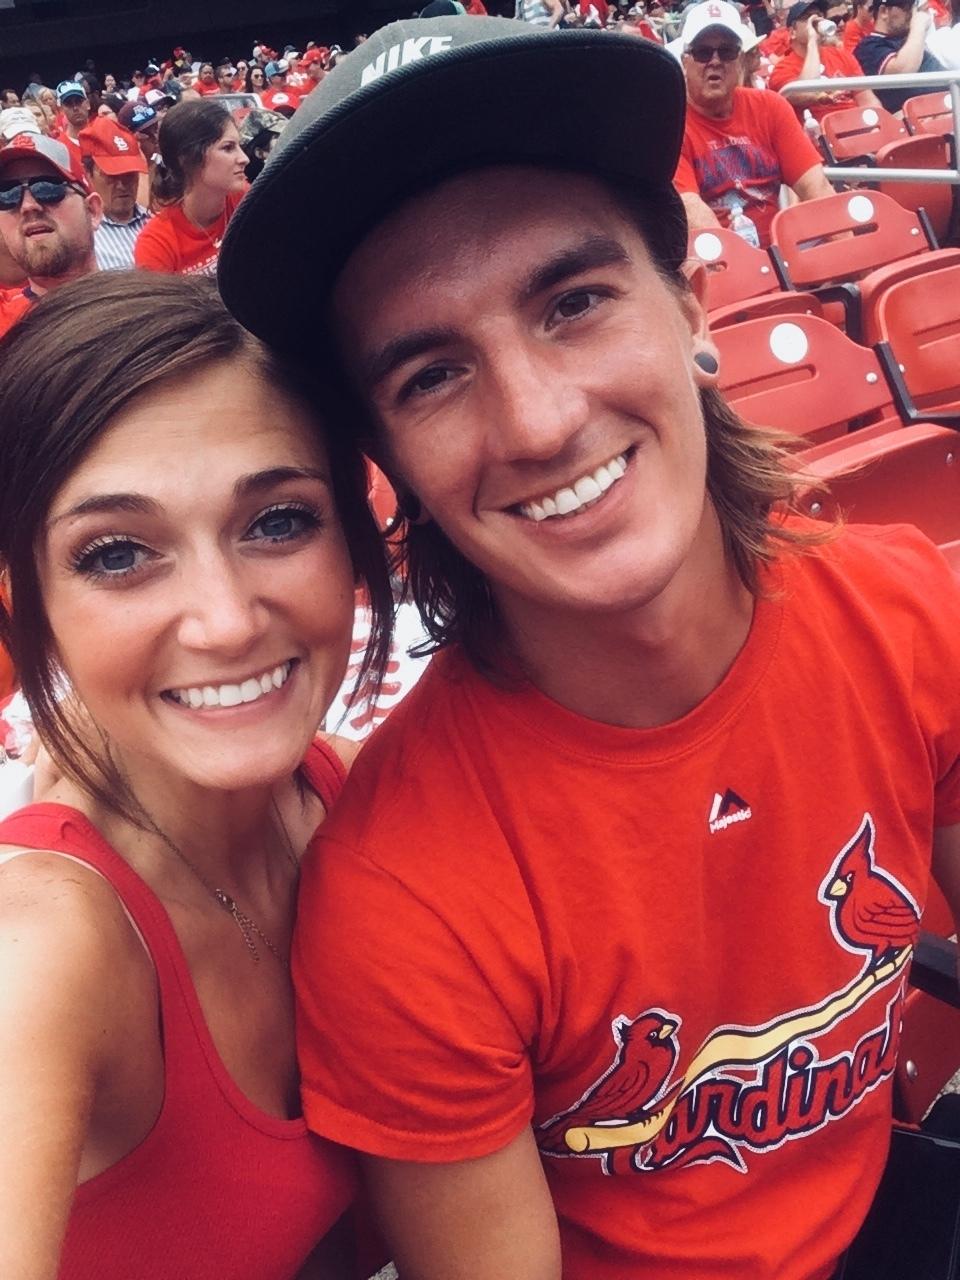 Susan Gore and Davey Bauer at a St. Louis Cardinals game in 2018.